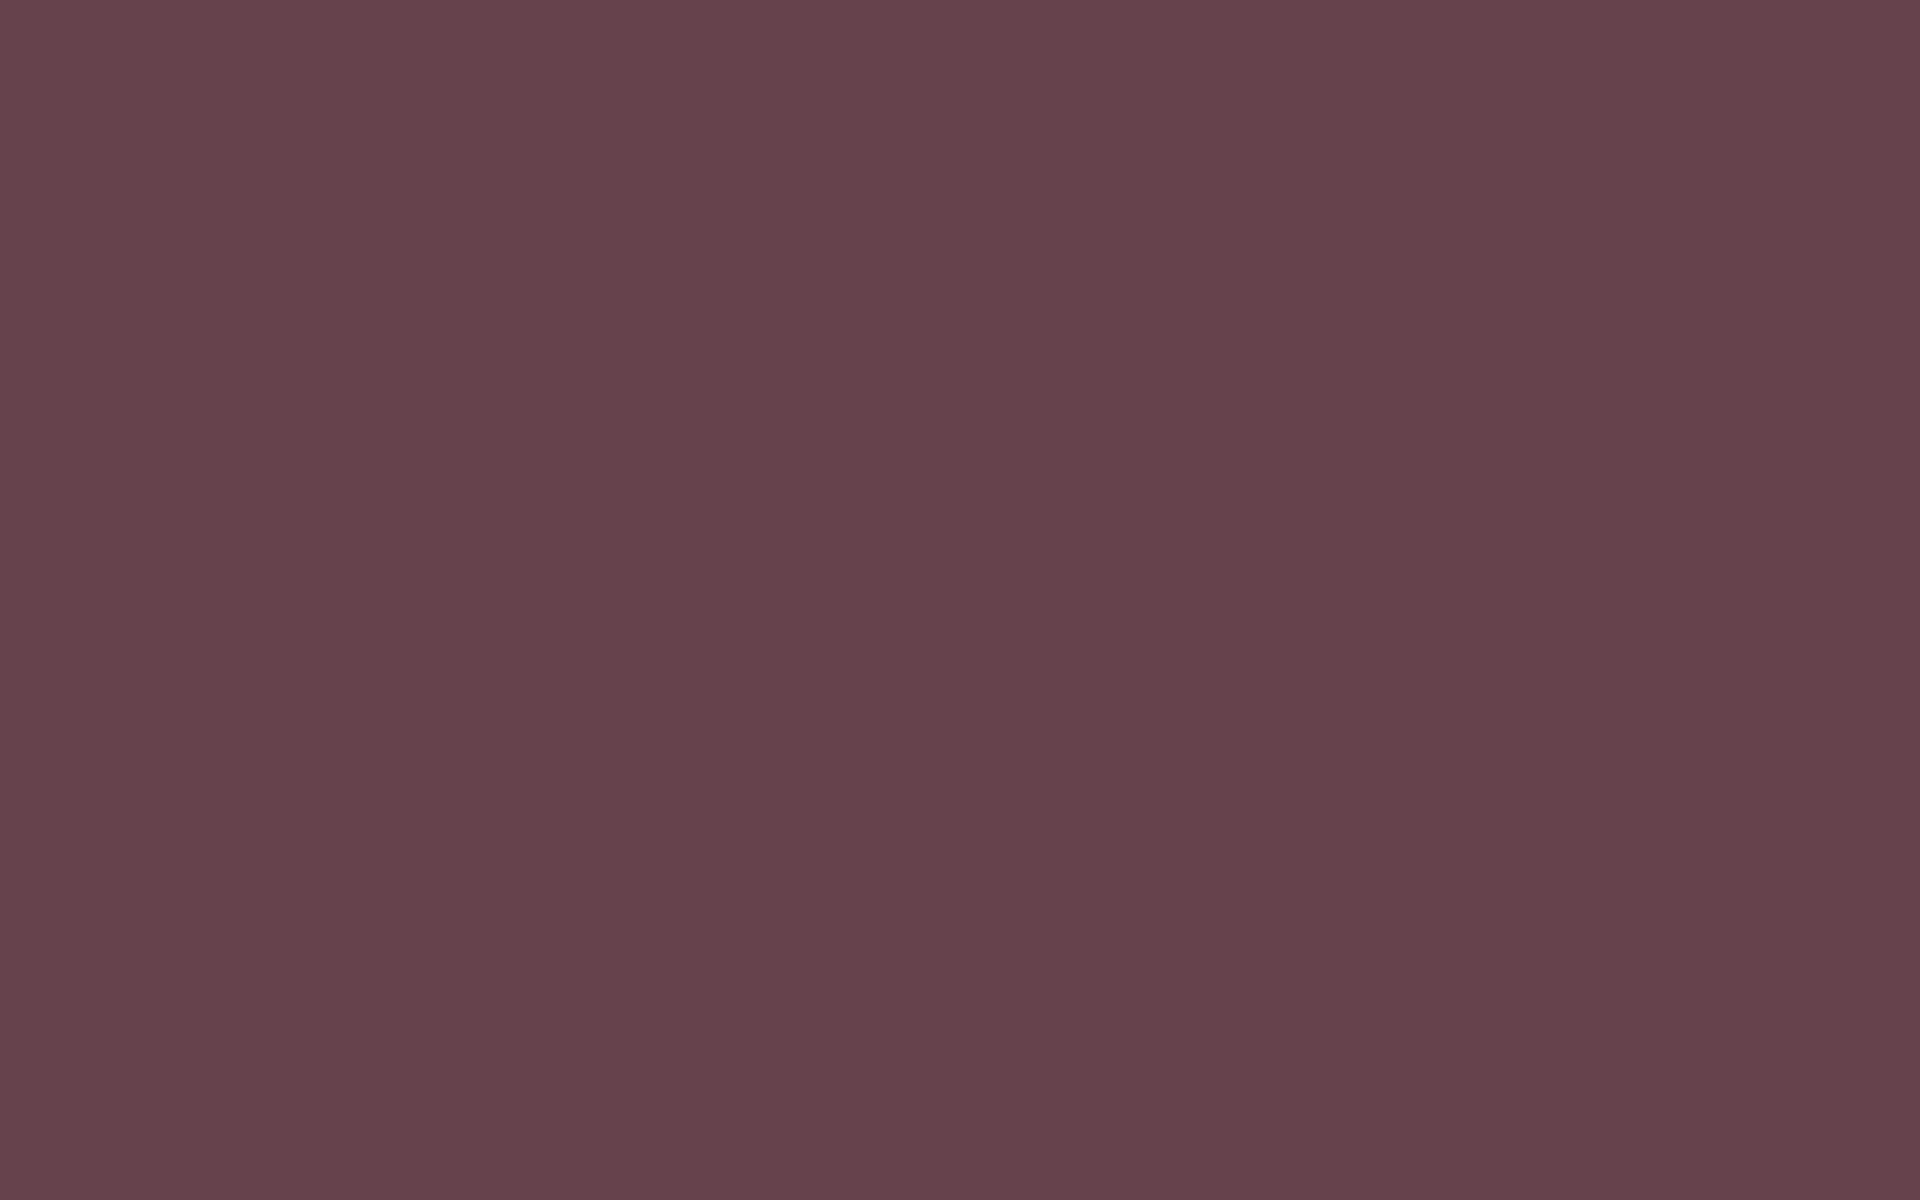 1920x1200 Deep Tuscan Red Solid Color Background